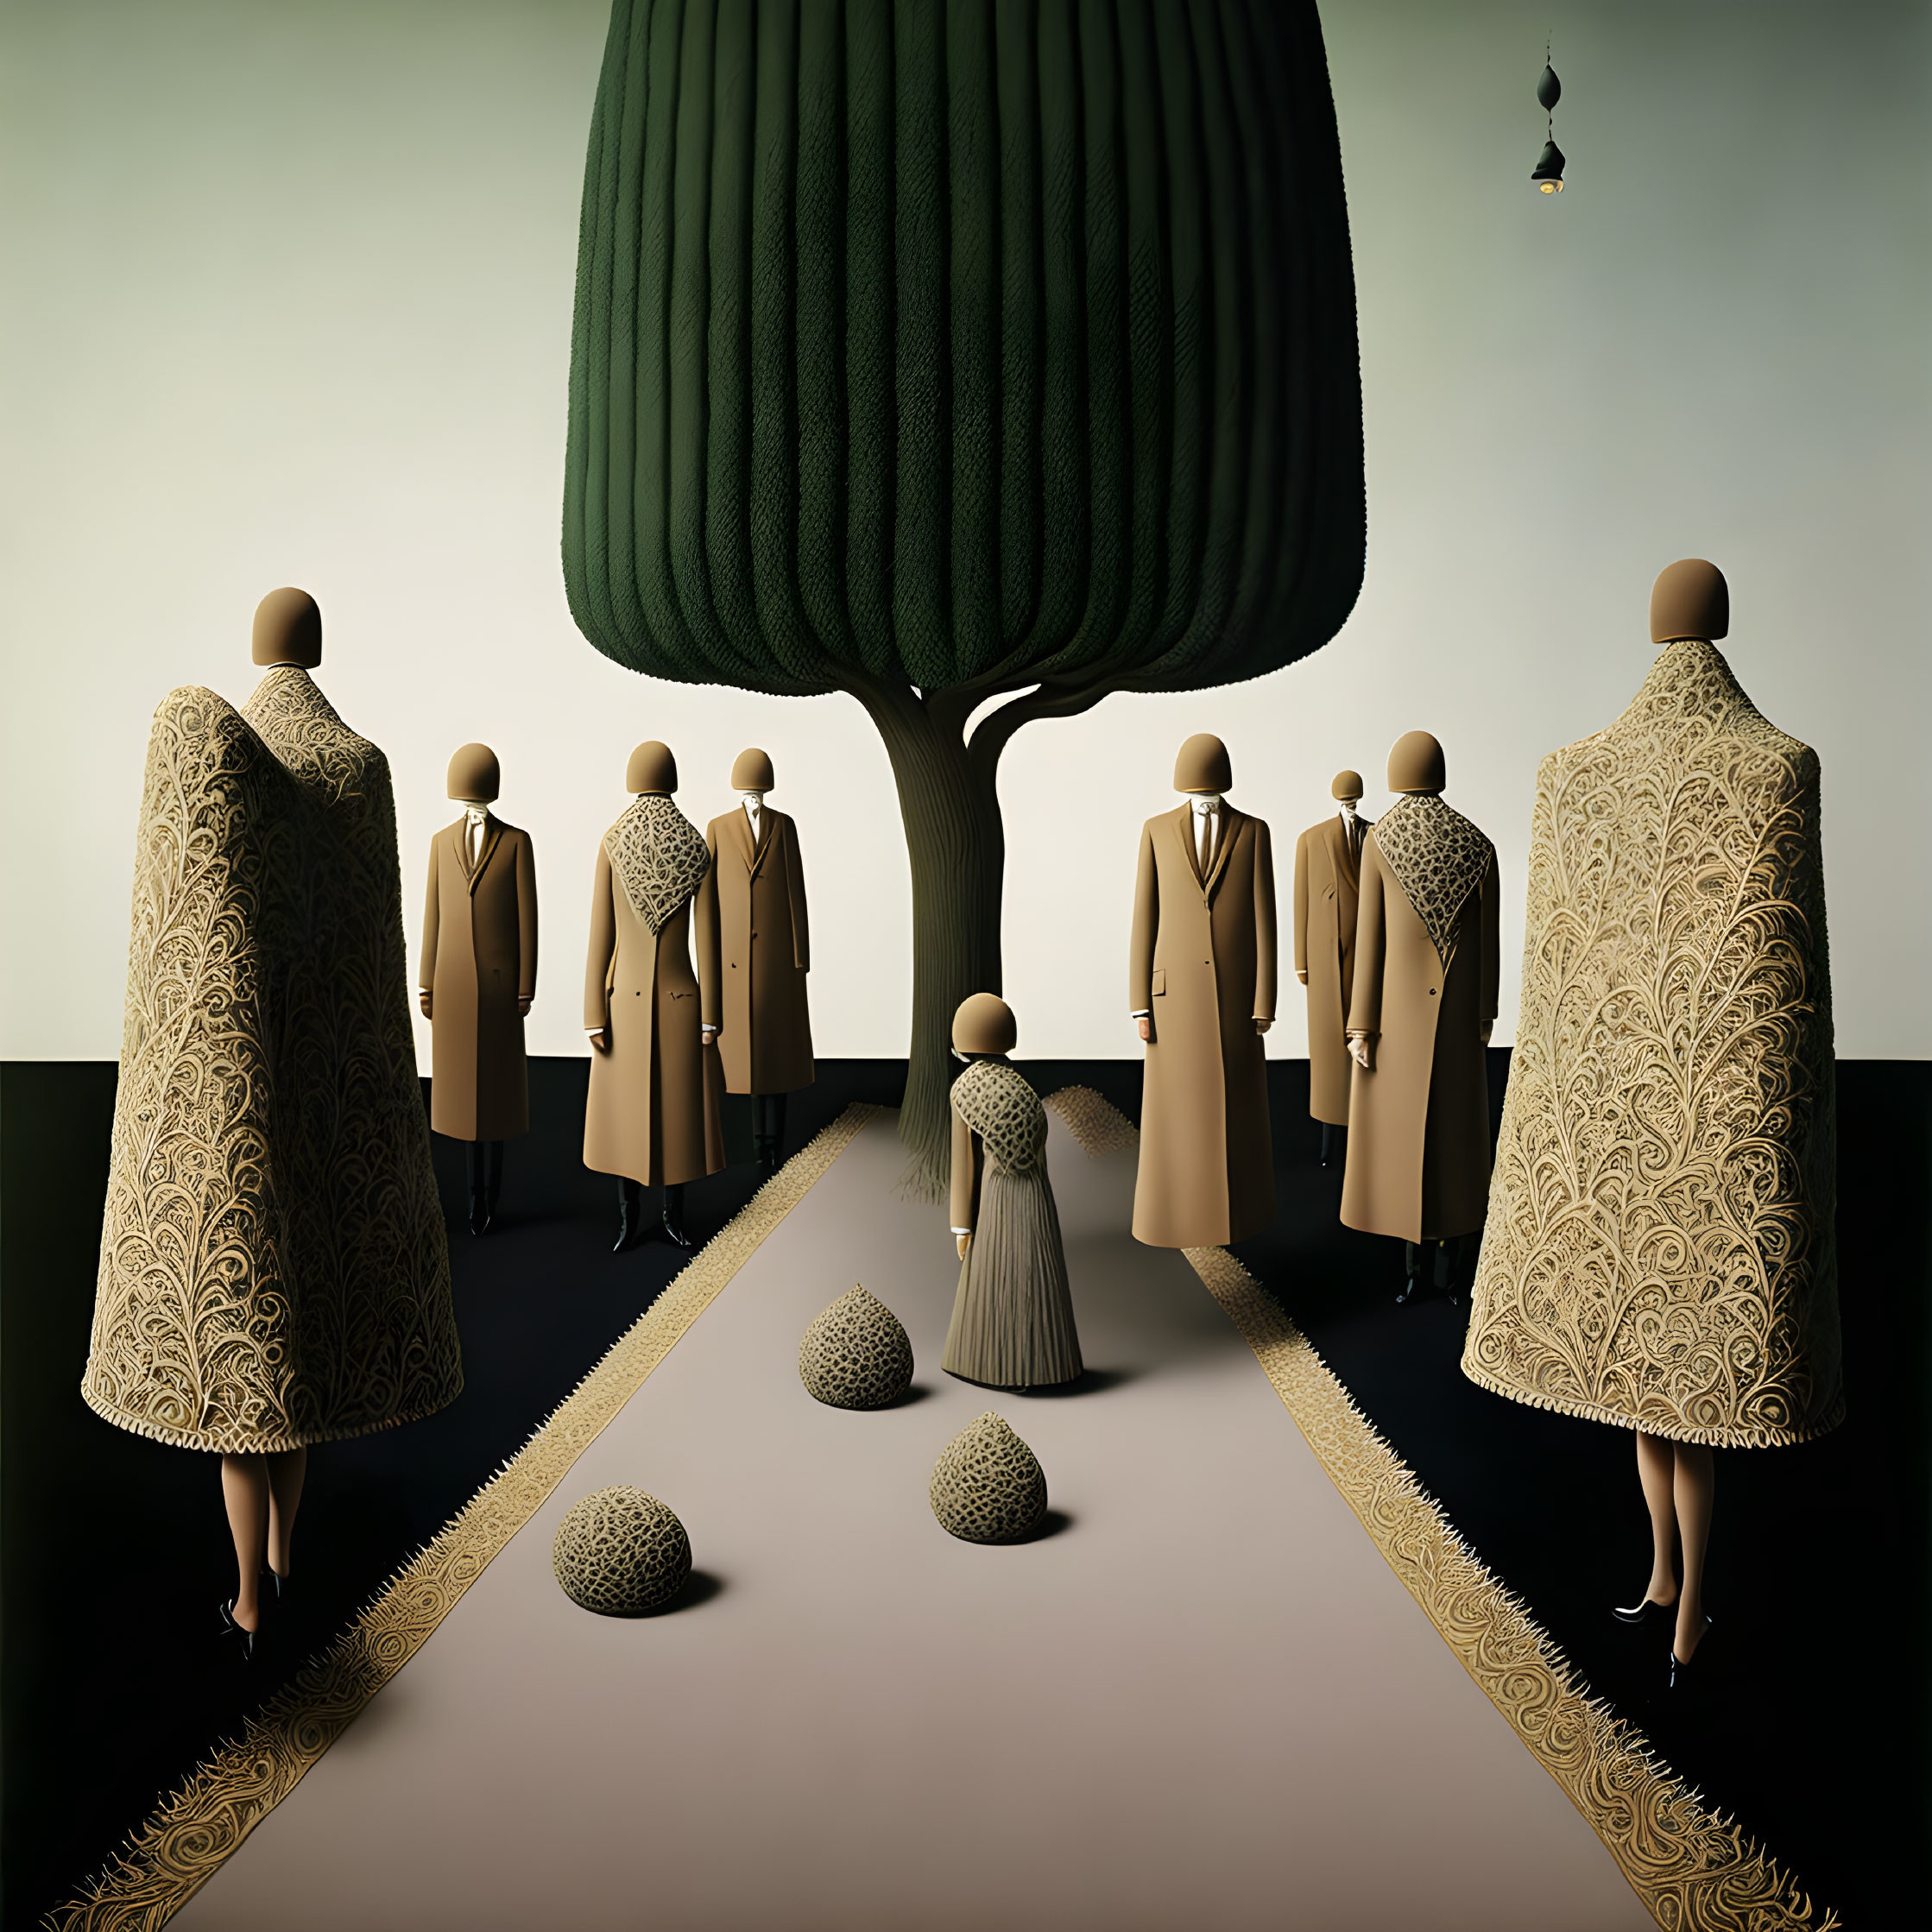 Mannequins in Coats Facing Tree with Spheres and Lightbulb